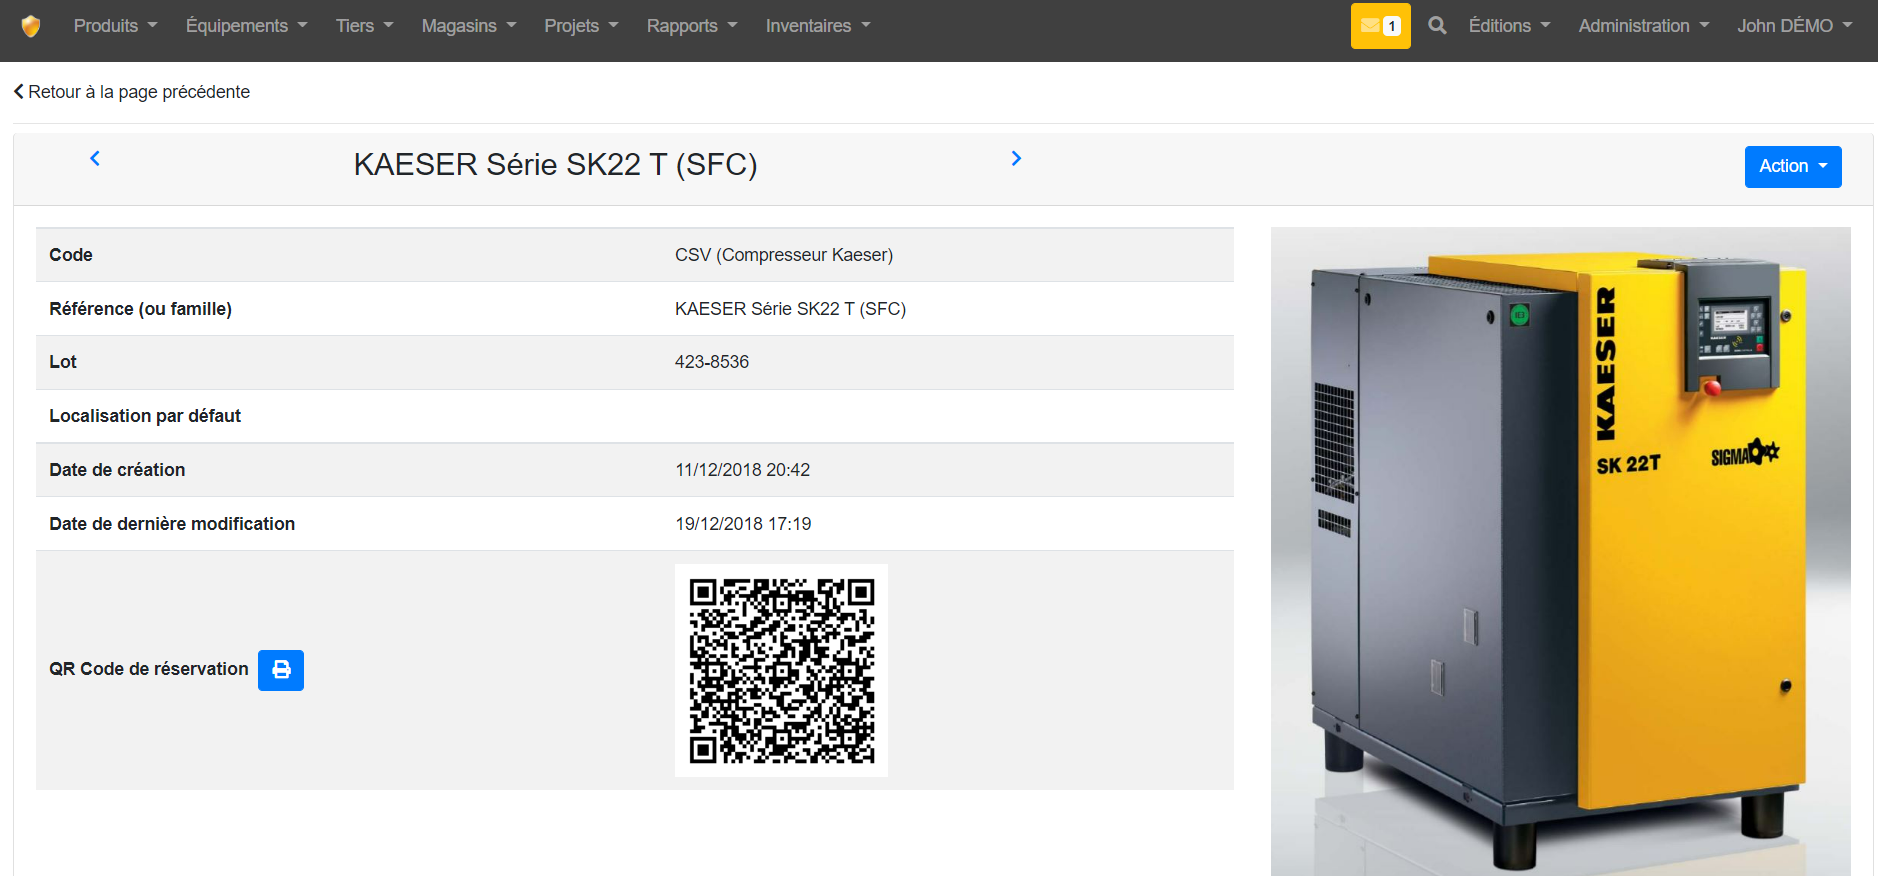 GSE-Web (Gestion de stock) - Scan the QR Code of your equipment to see the existing stocks